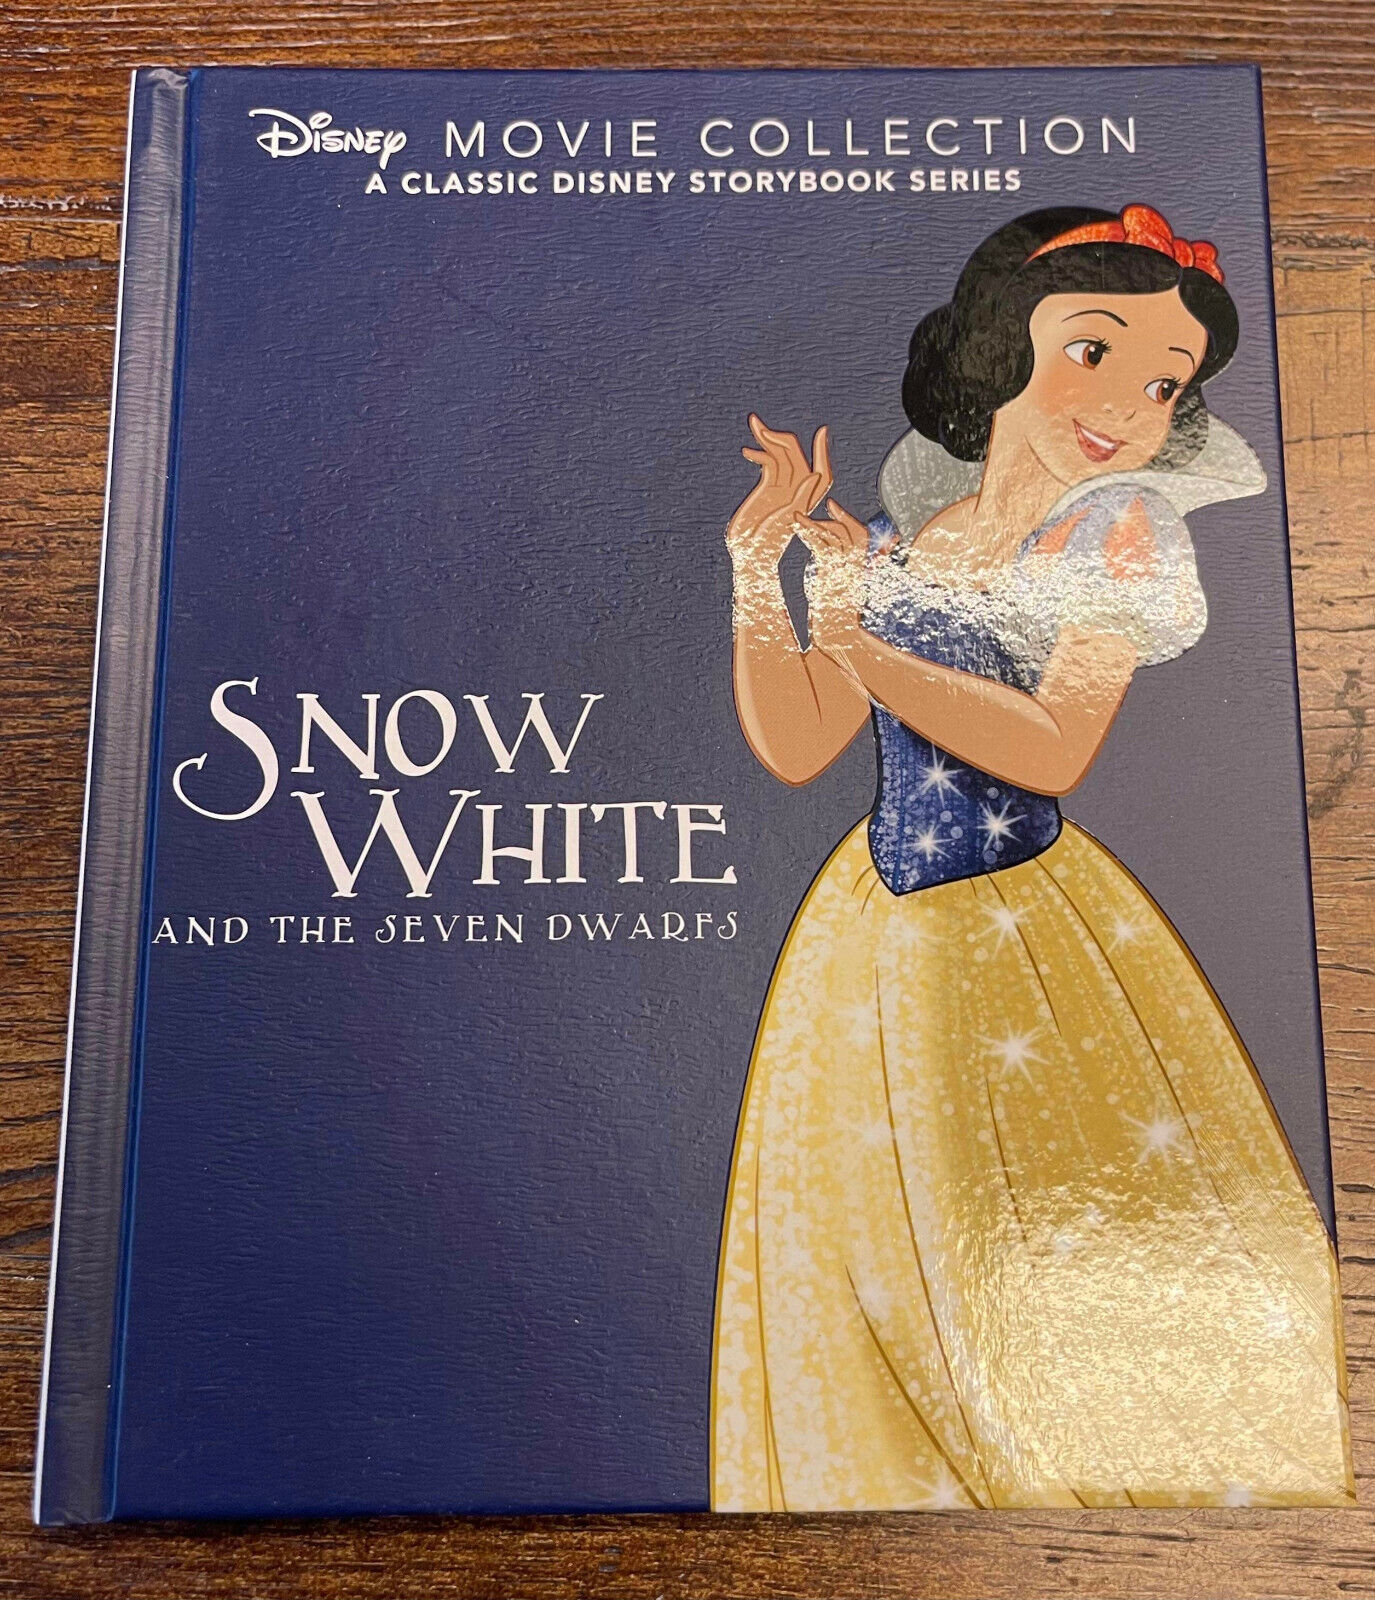 Disney Movie Collection Book Hardcover  Snow White and the Seven Dwarfs